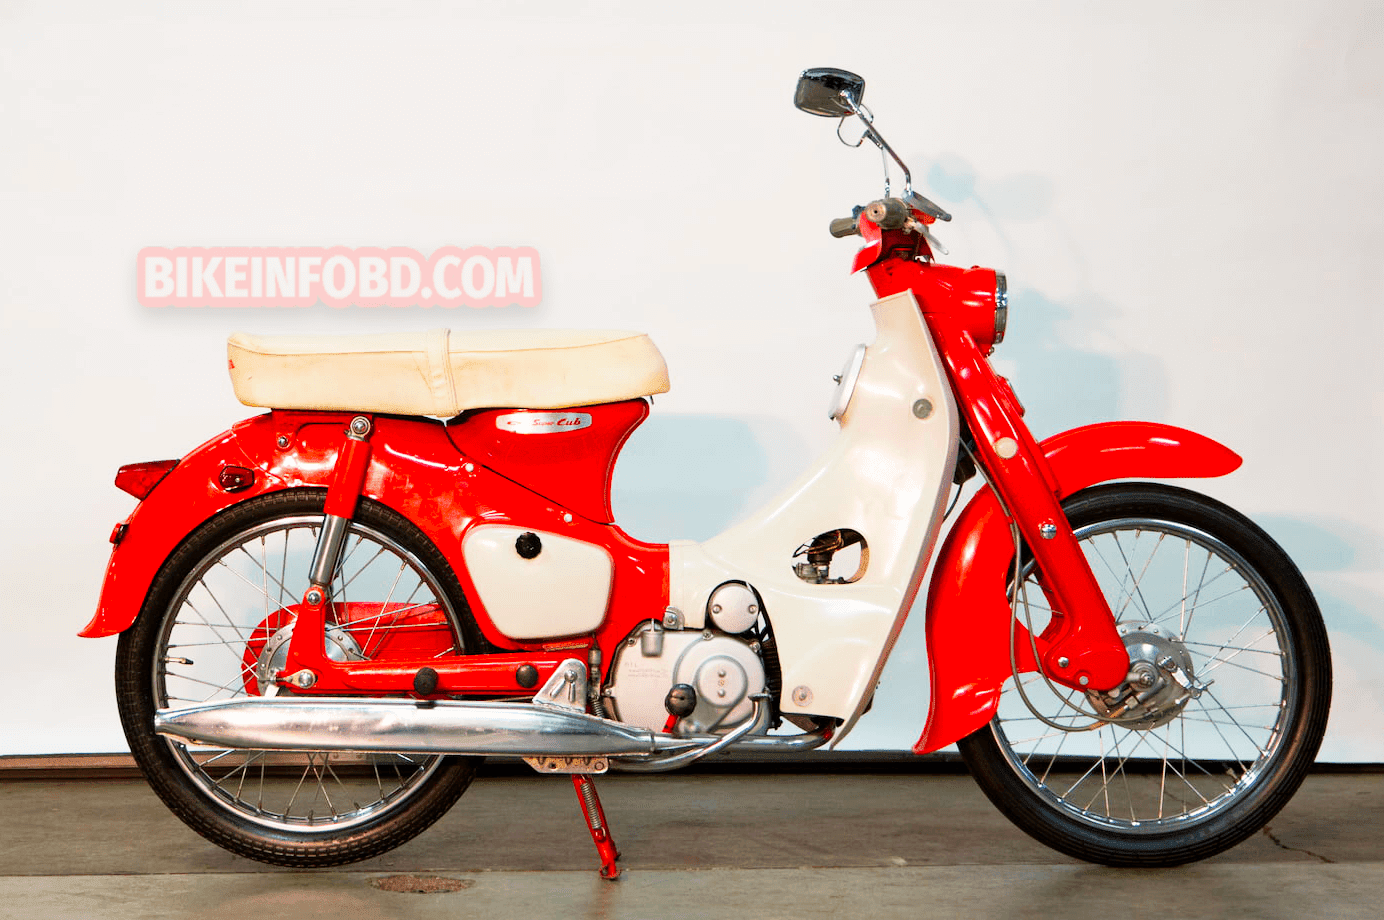 Honda Super Cub 50 Specifications, Review, Top Speed, Picture, Engine ...